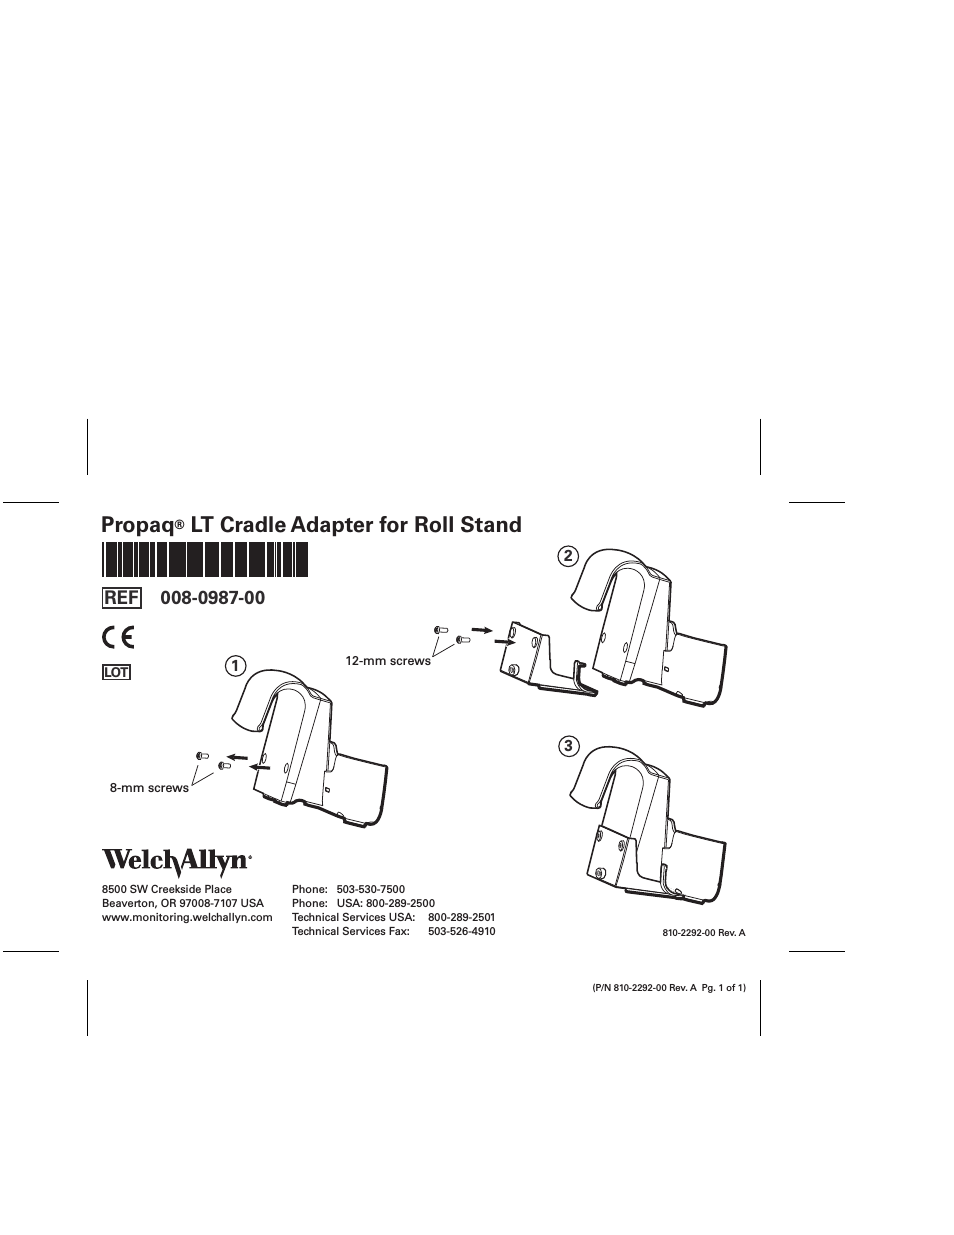 Propaq LT Cradle Adapter For Roll Stand, 810-2292-00A.Pdf - Installation Guide